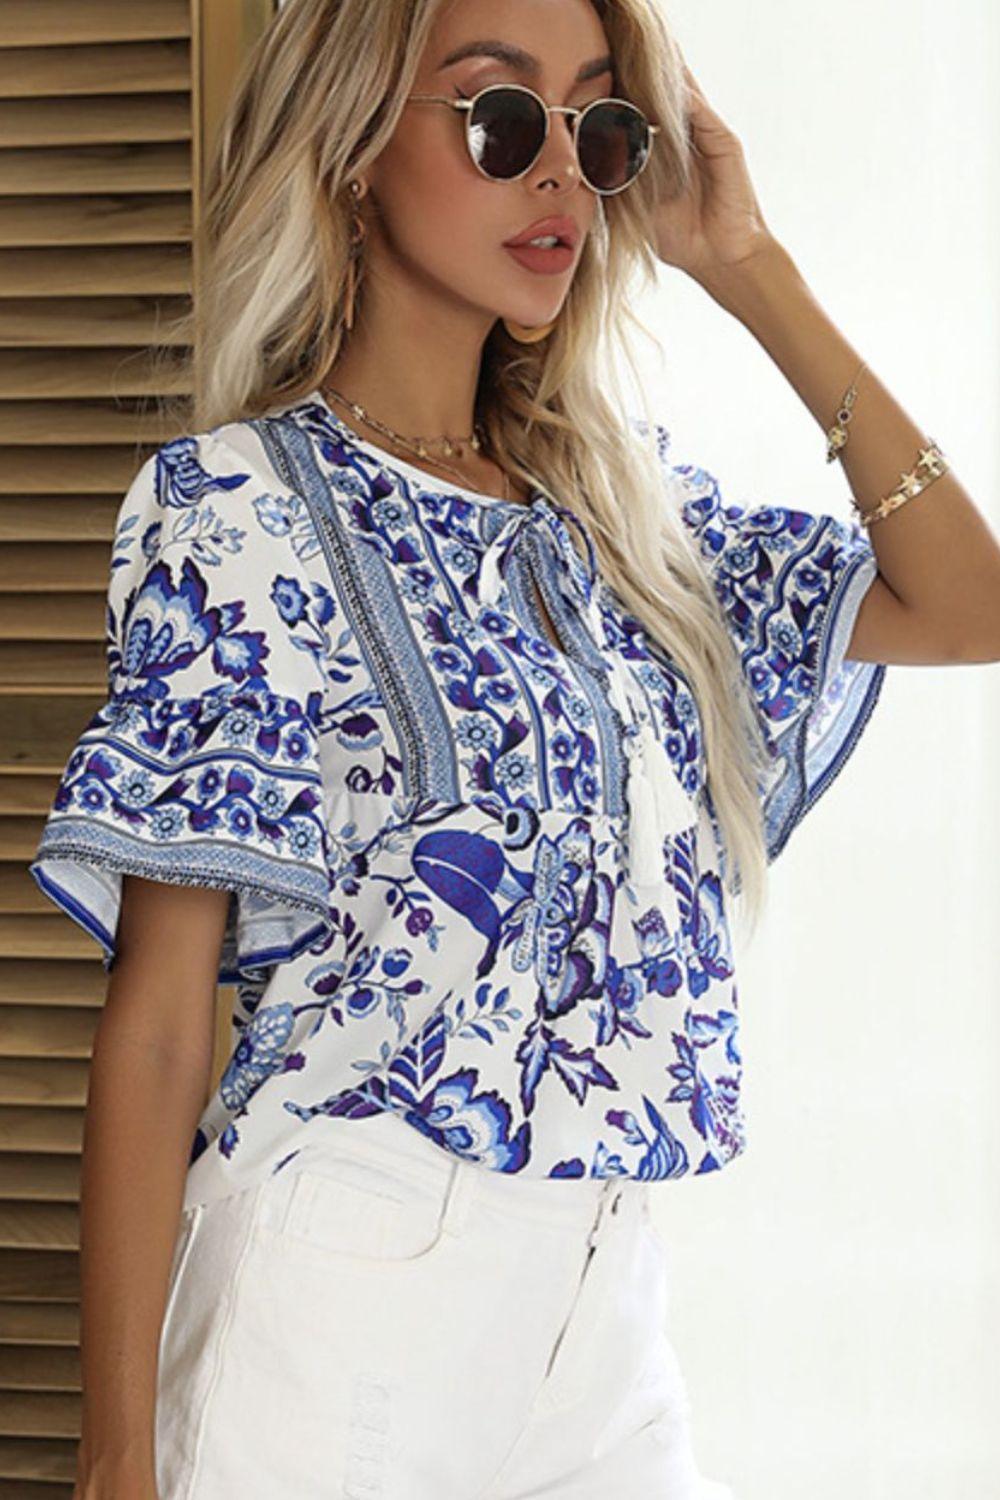 Pause And Relax Half Sleeve Blue Floral Blouse - MXSTUDIO.COM